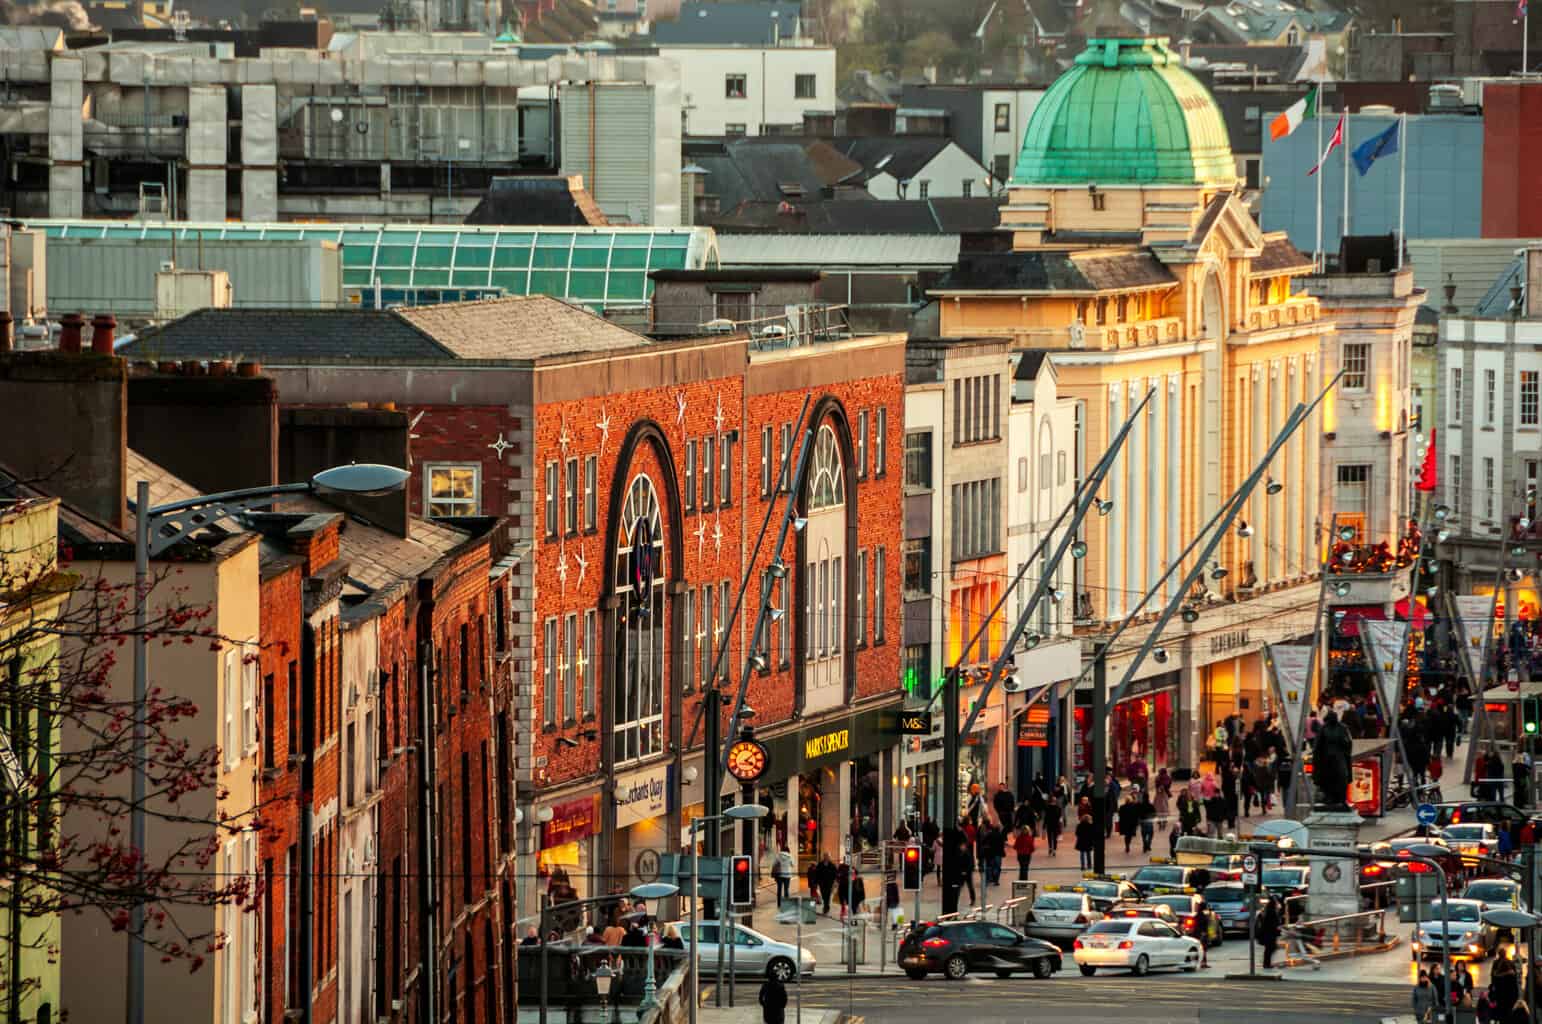 cork city aerial view scaled Wondering how to spend a day in Cork City? Well, you have come to the right spot as we have the 5 best things for you to do.